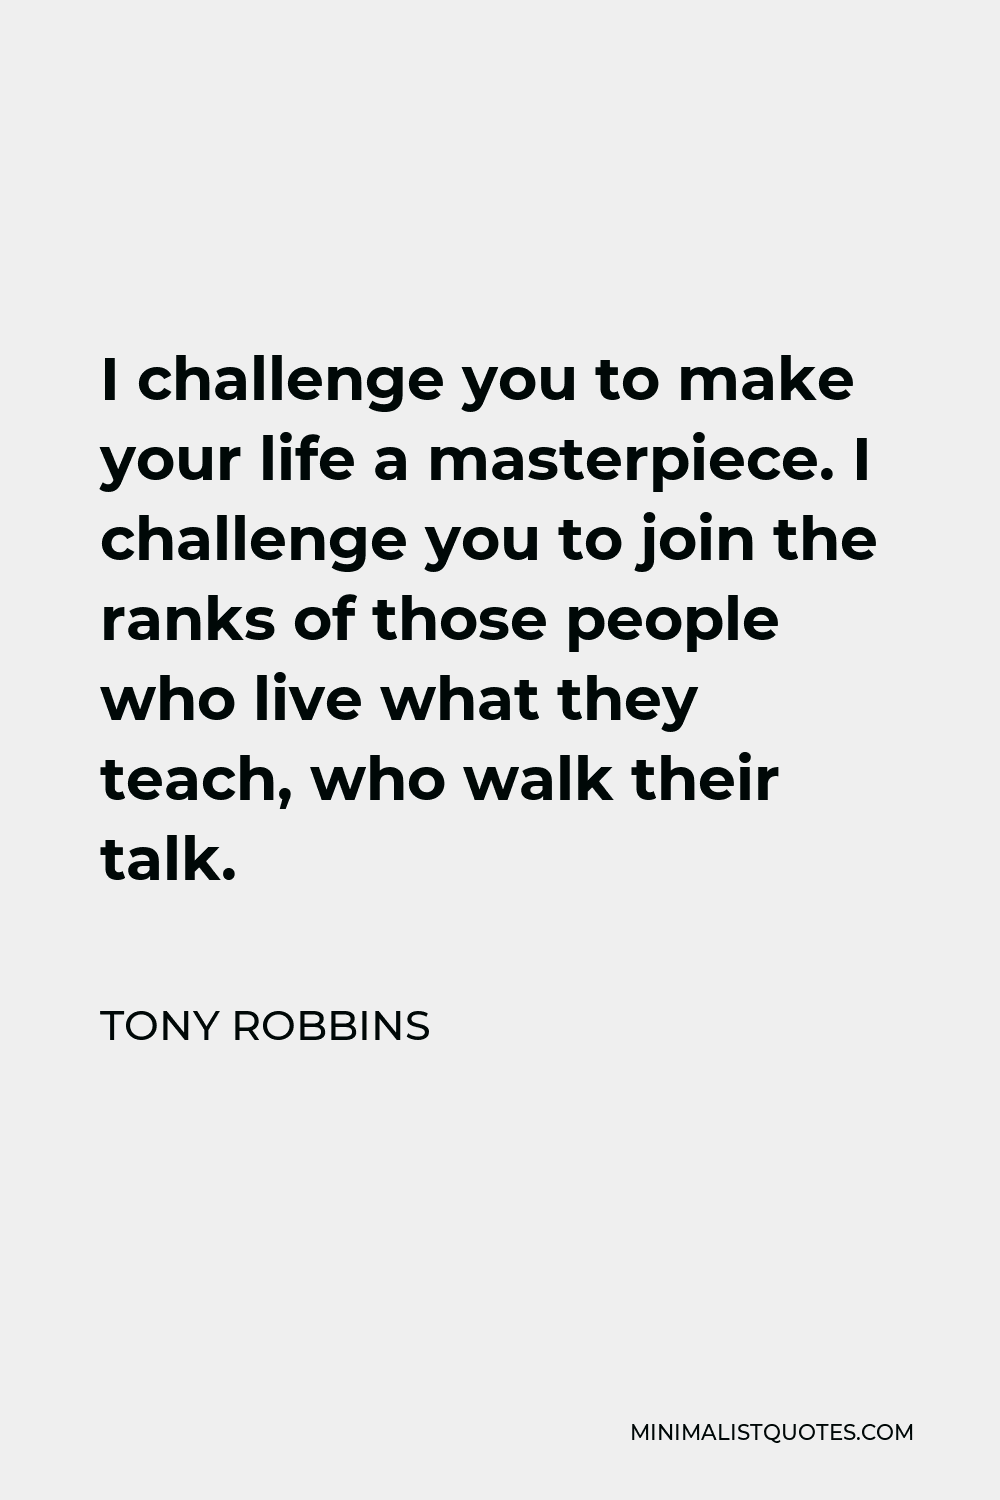 Tony Robbins Quote - I challenge you to make your life a masterpiece. I challenge you to join the ranks of those people who live what they teach, who walk their talk.